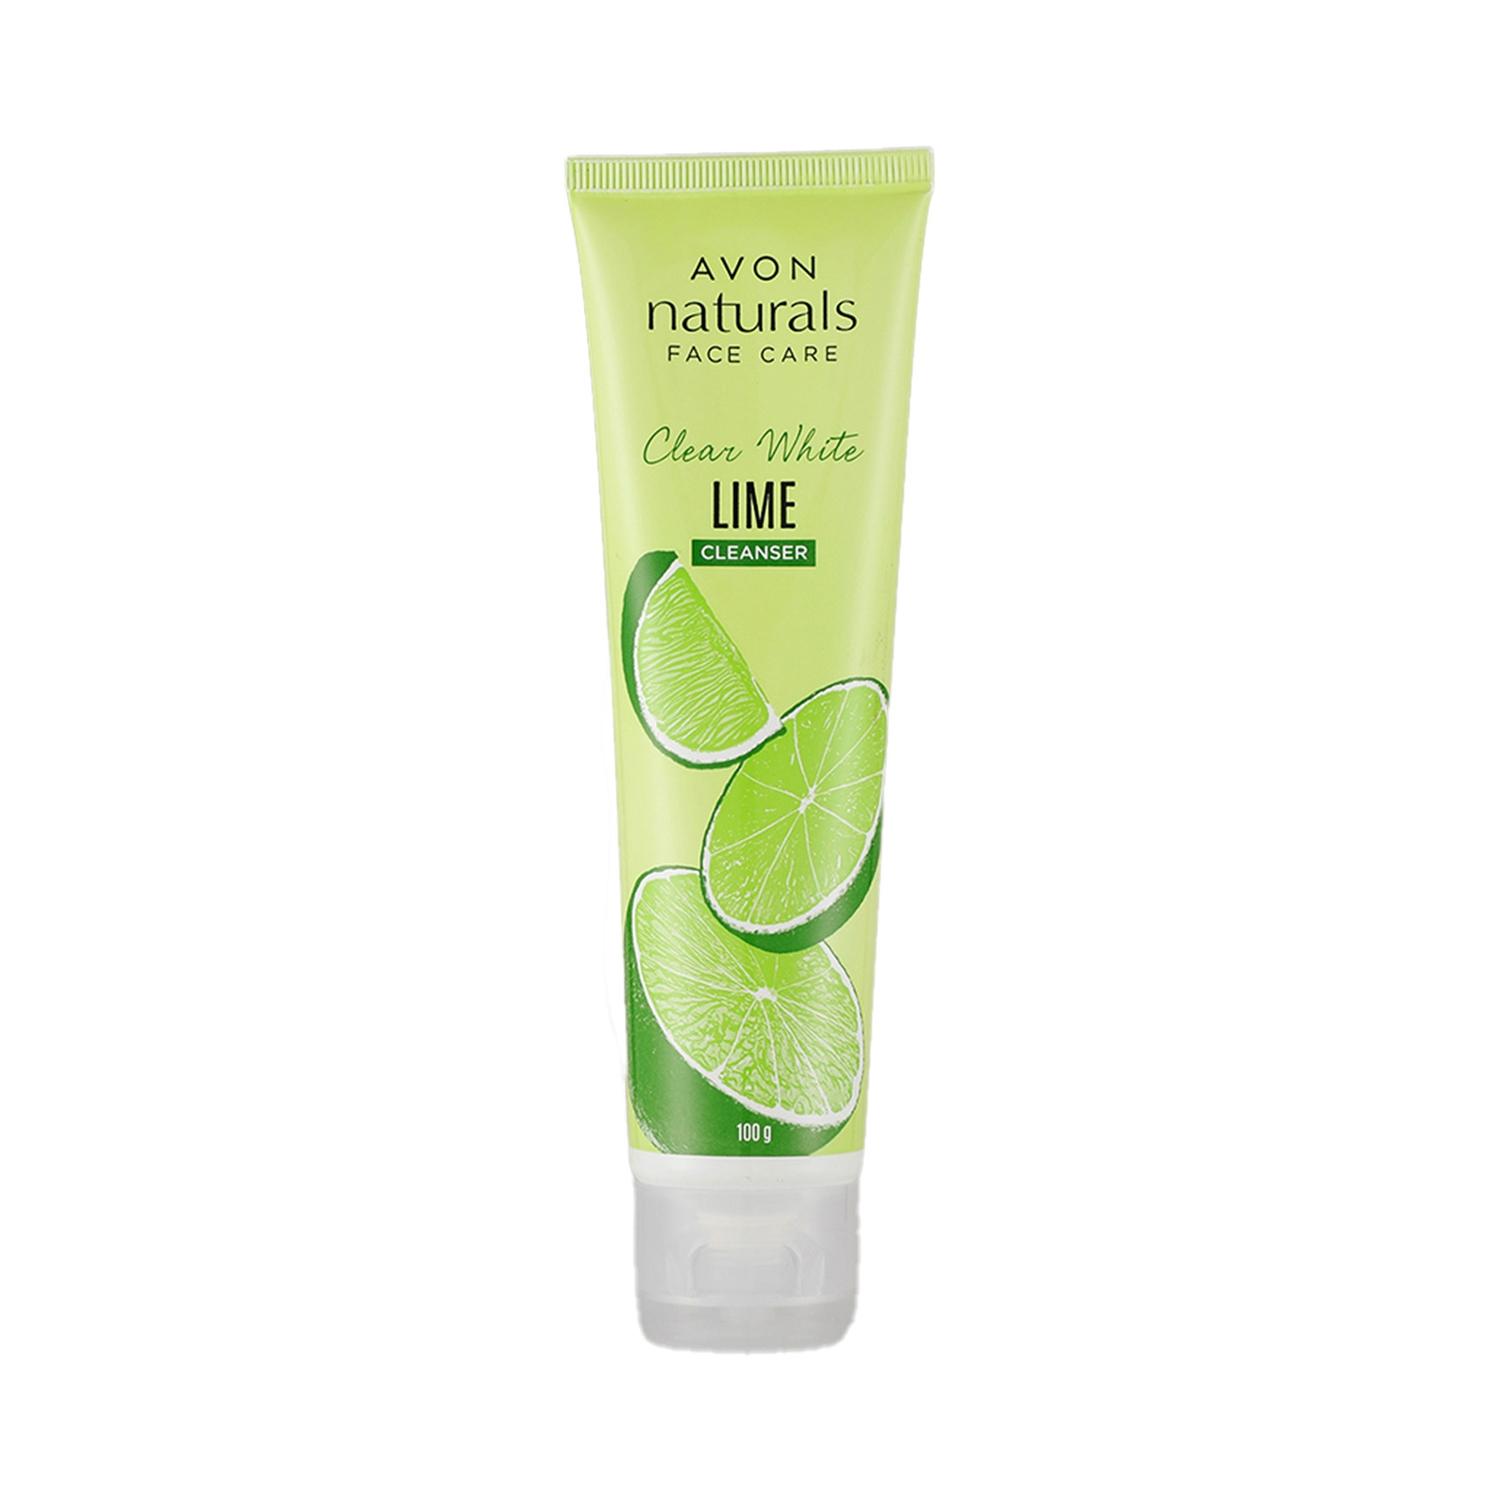 avon naturals clear white lime face cleanser (100g)